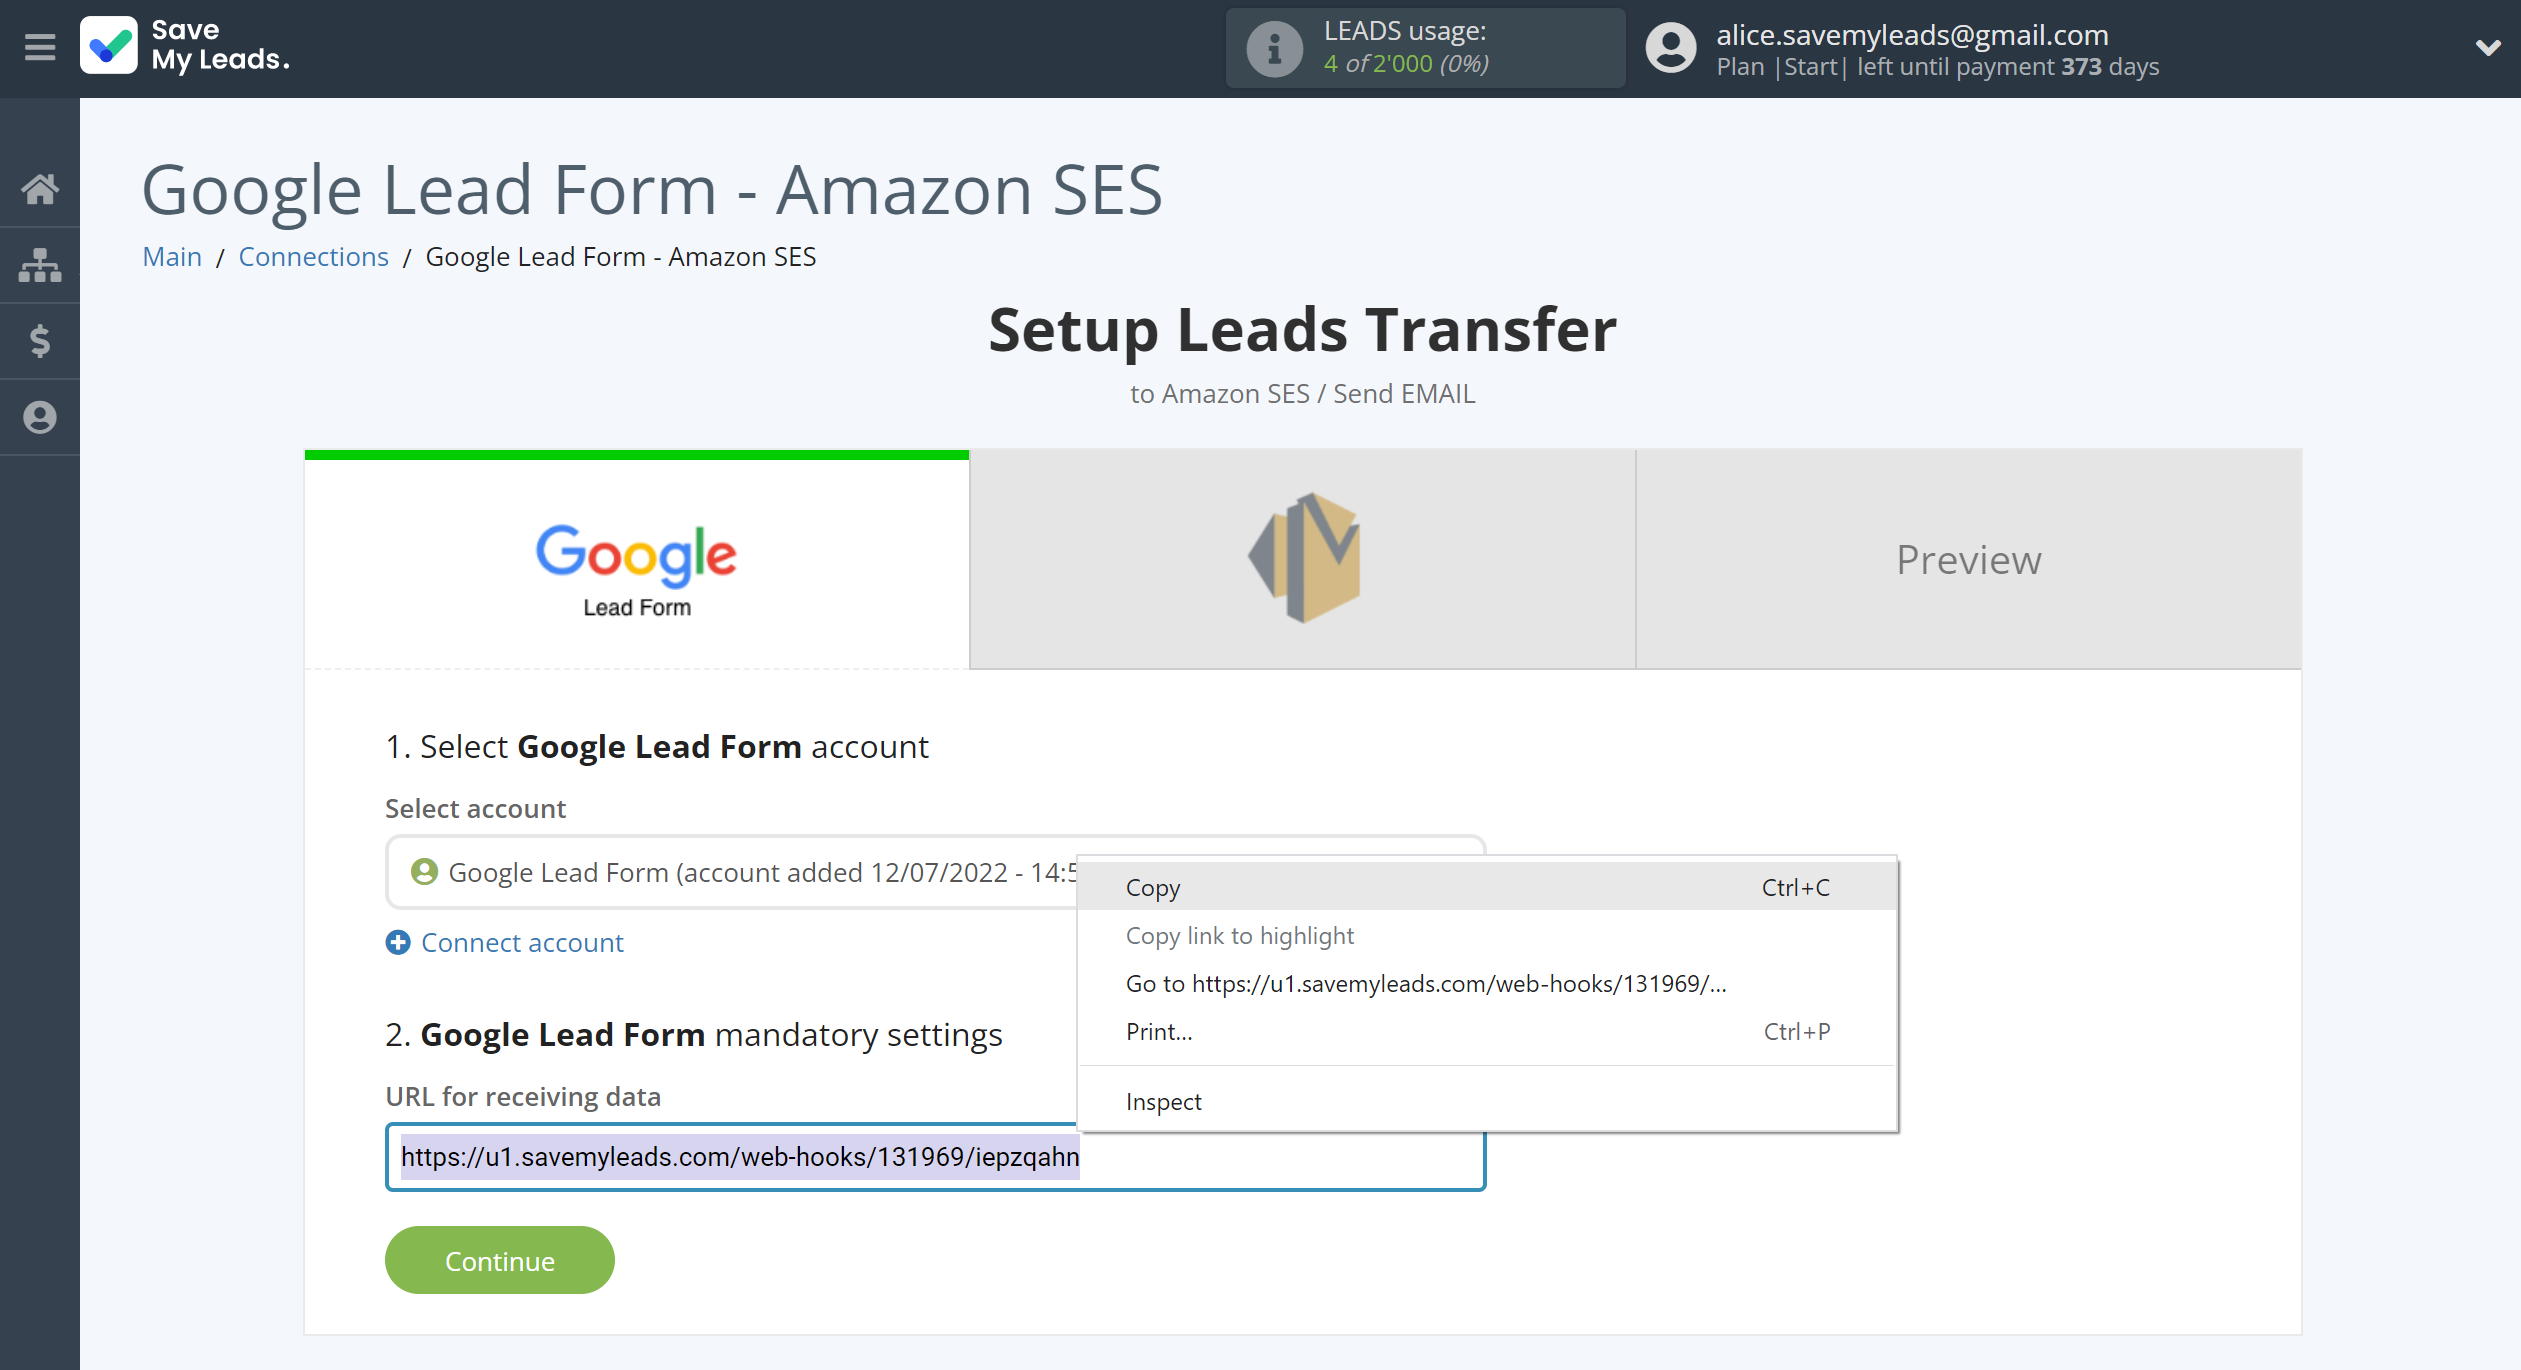 How to Connect Google Lead Form with Amazon SES | Data Source account connection